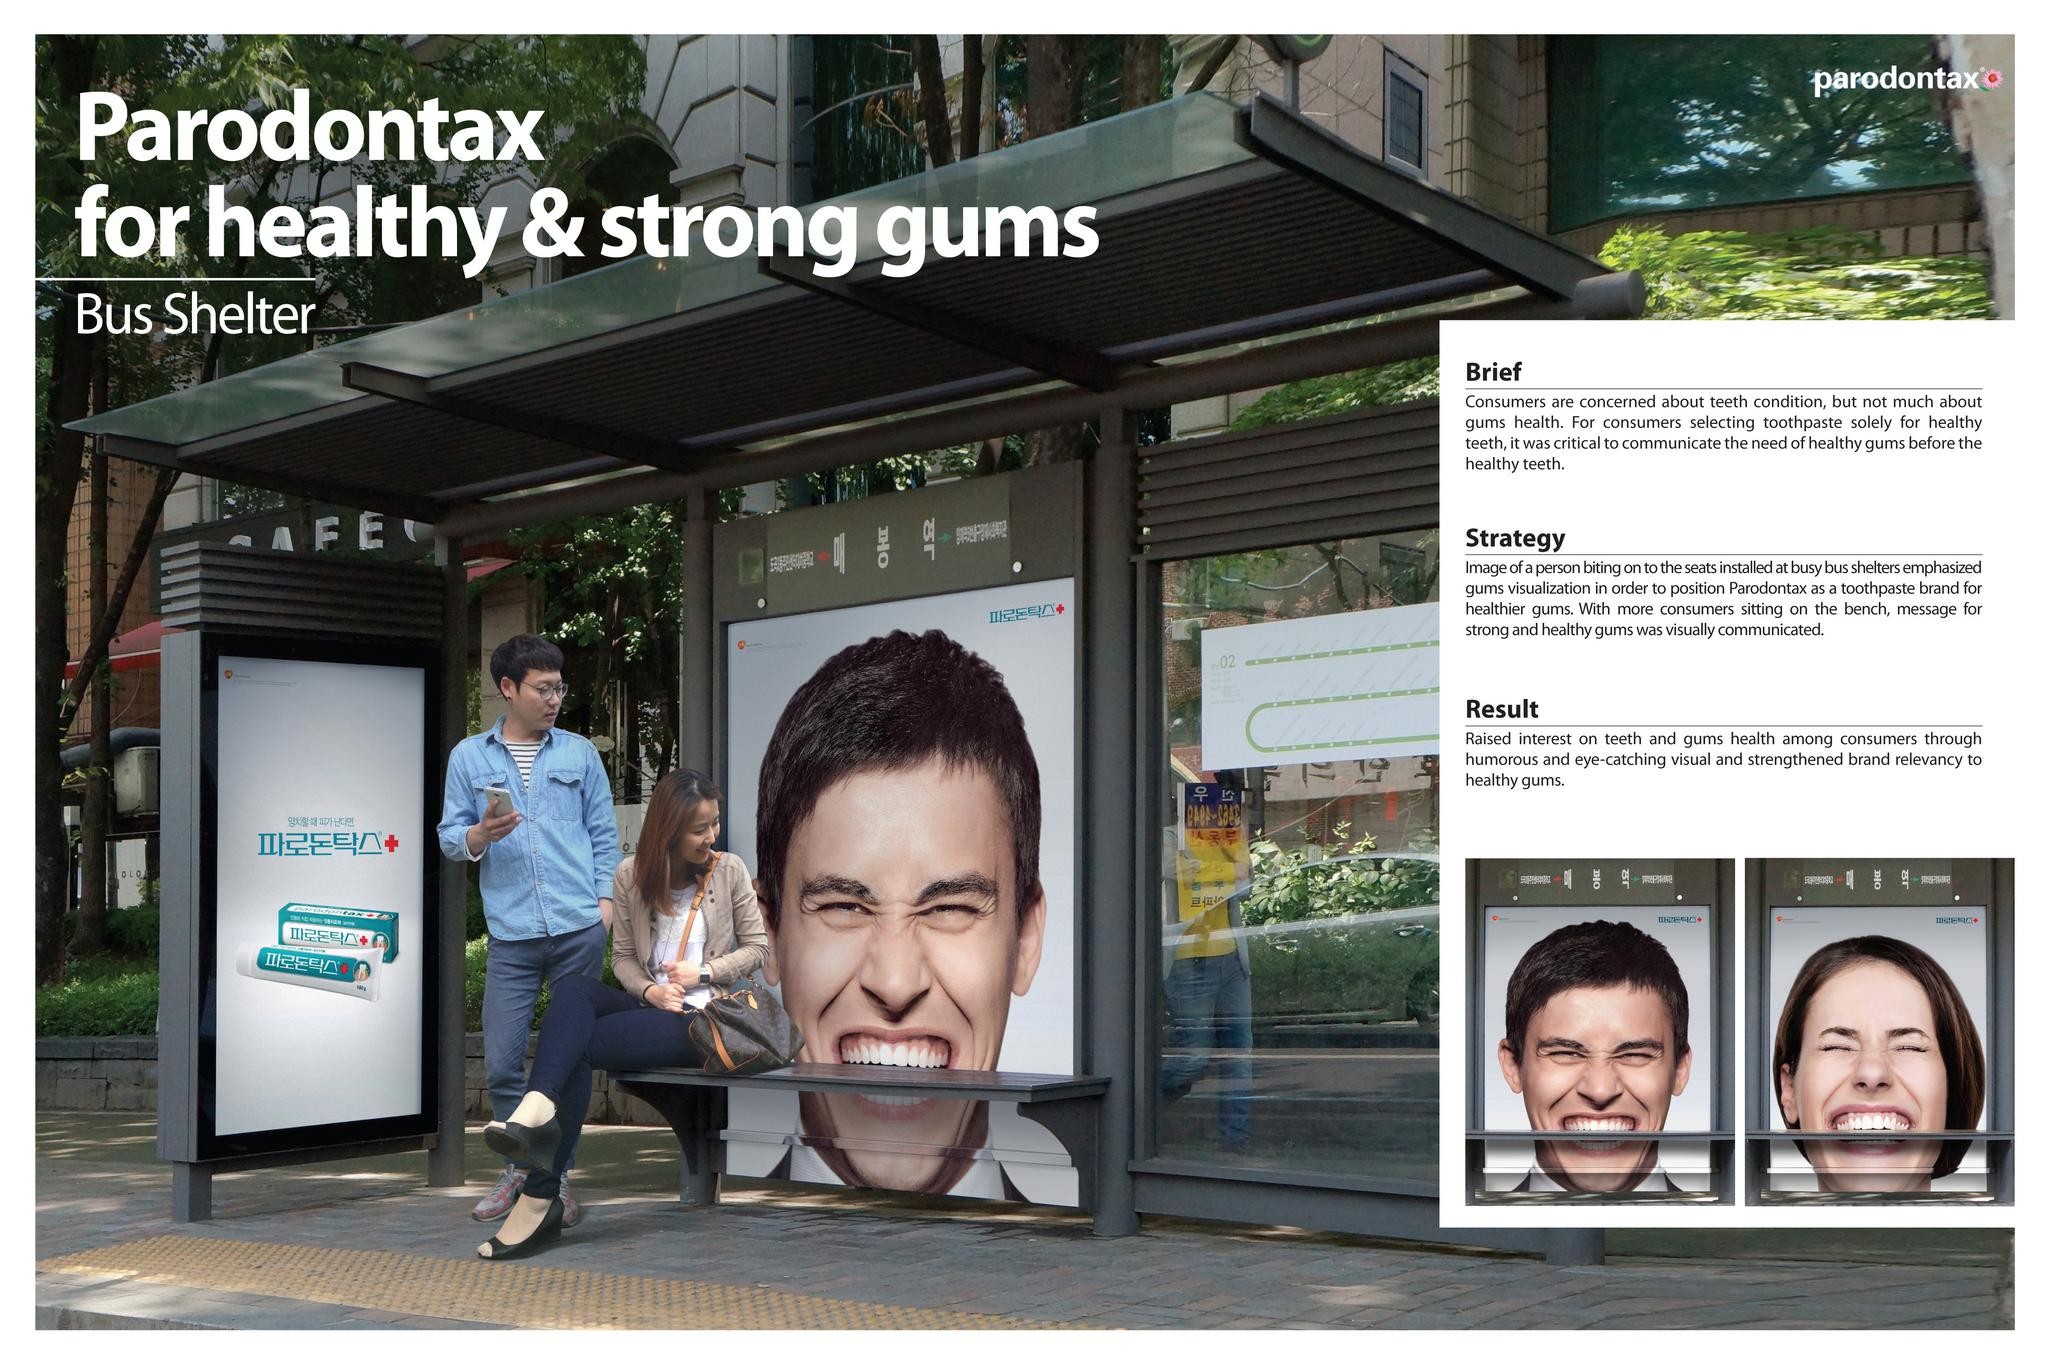 PARODONTAX FOR HEALTHY & STRONG GUMS